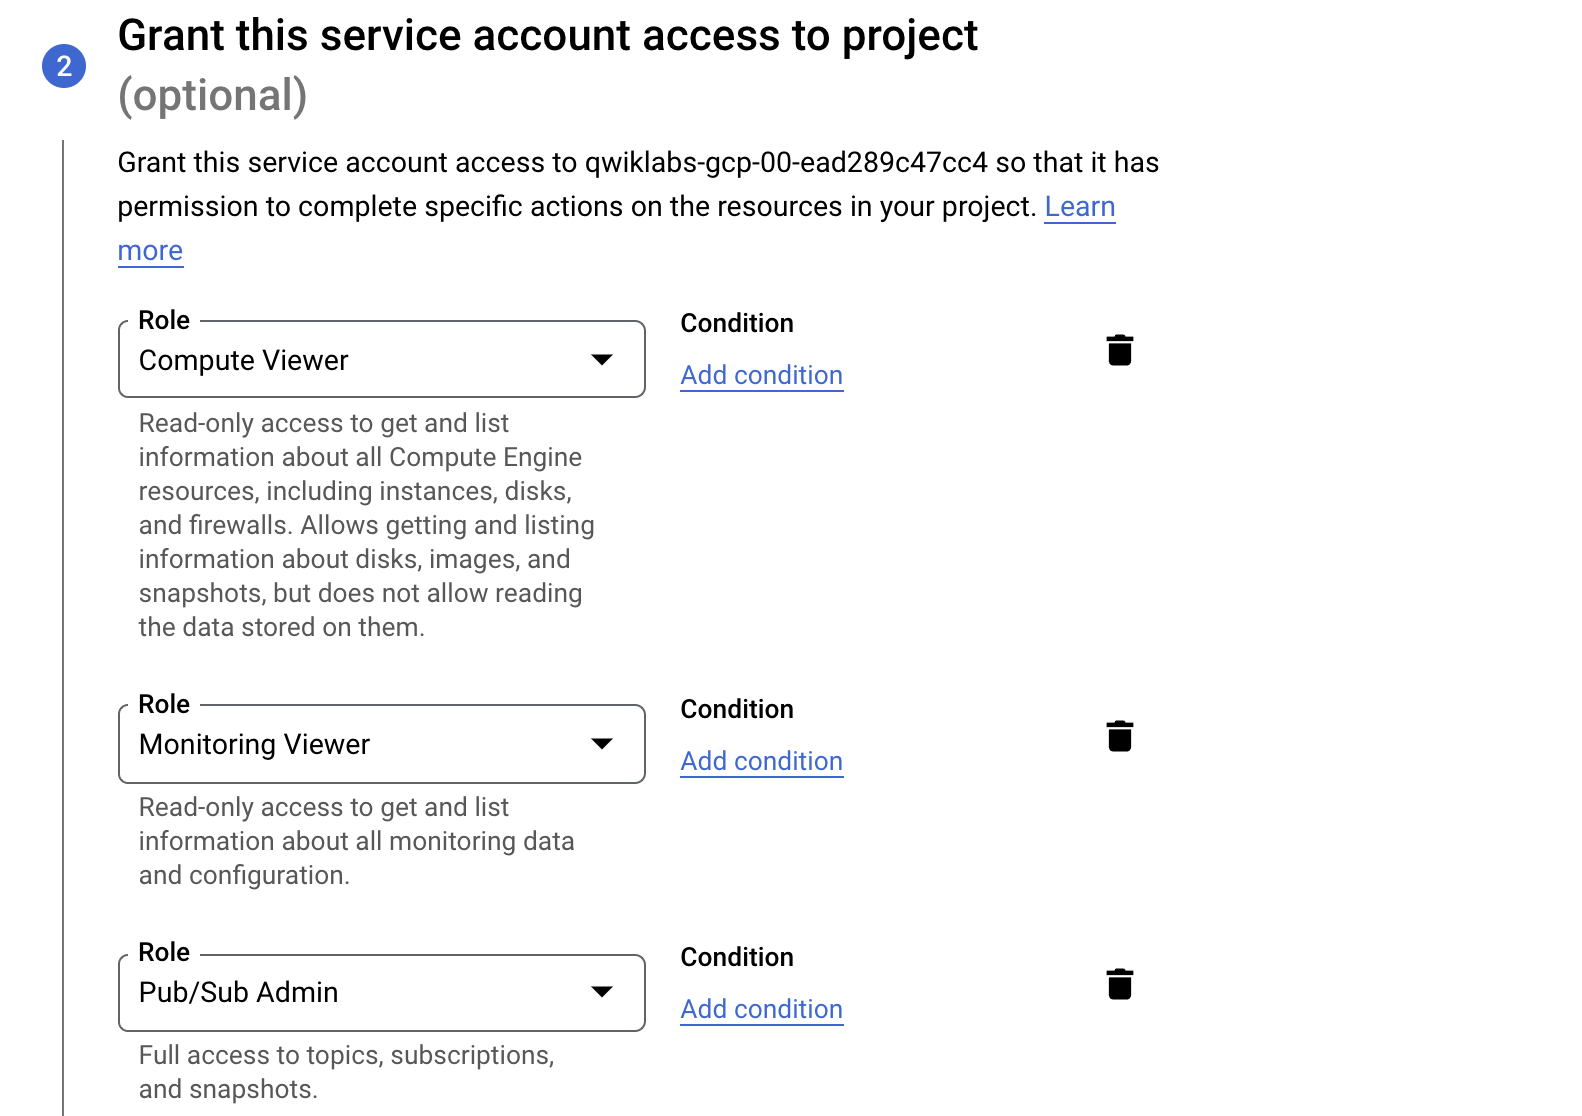 The step two, Grant this service account access to project (optional), section